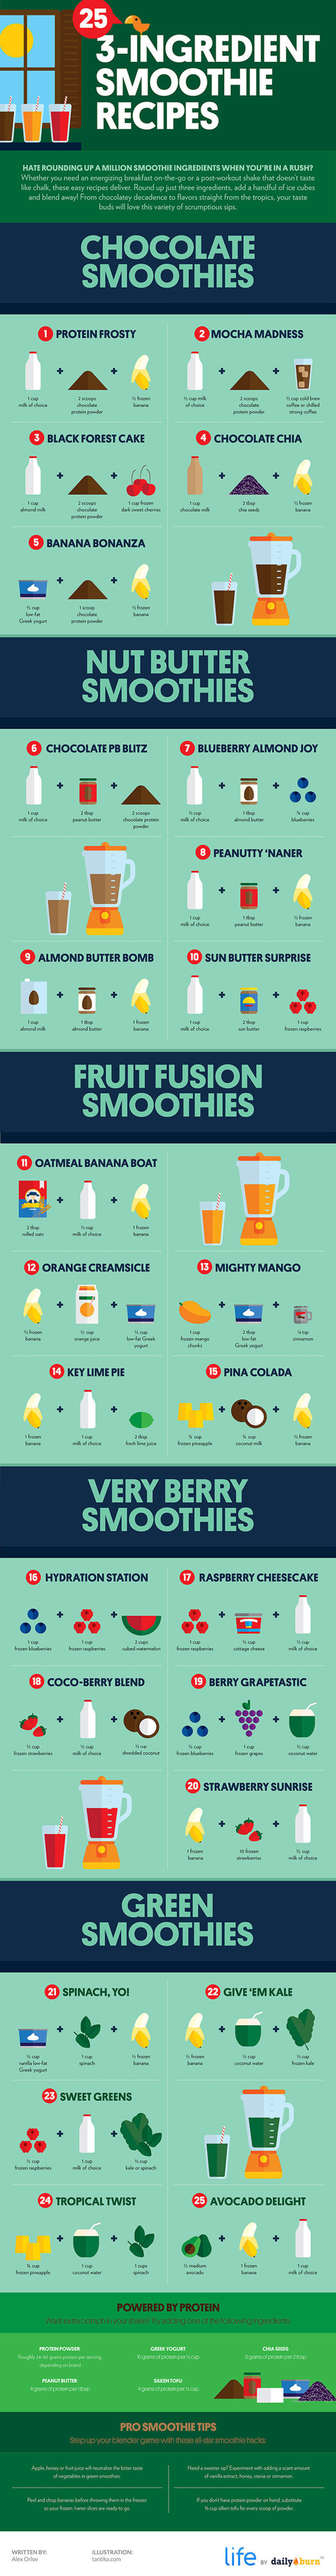 Smoothie Recipes For Breakfast